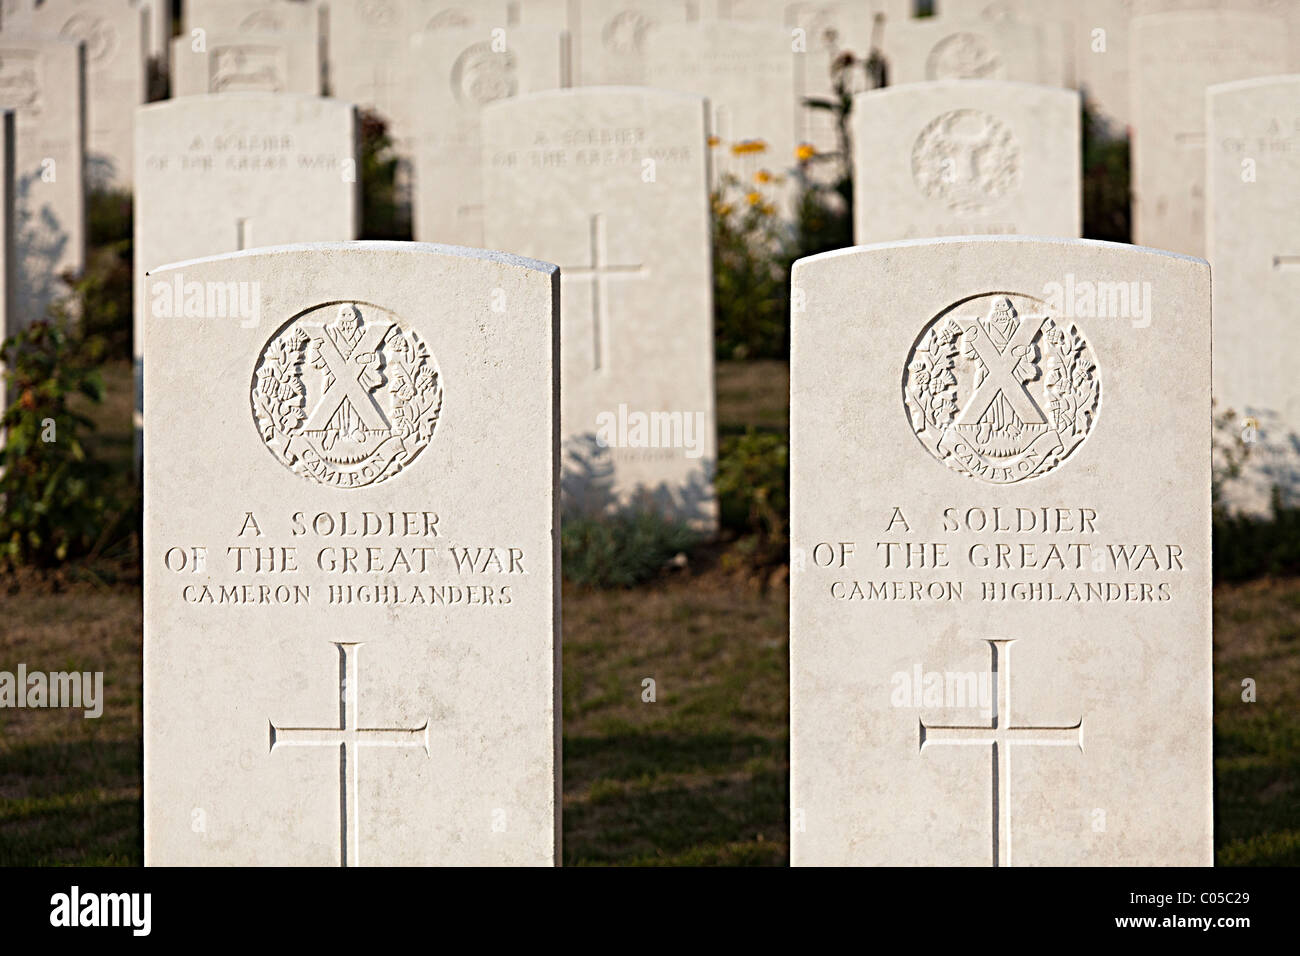 A Soldier of the Great War gravestones Cameron Highlanders regiment First World War cemetery Vimy ridge France Stock Photo